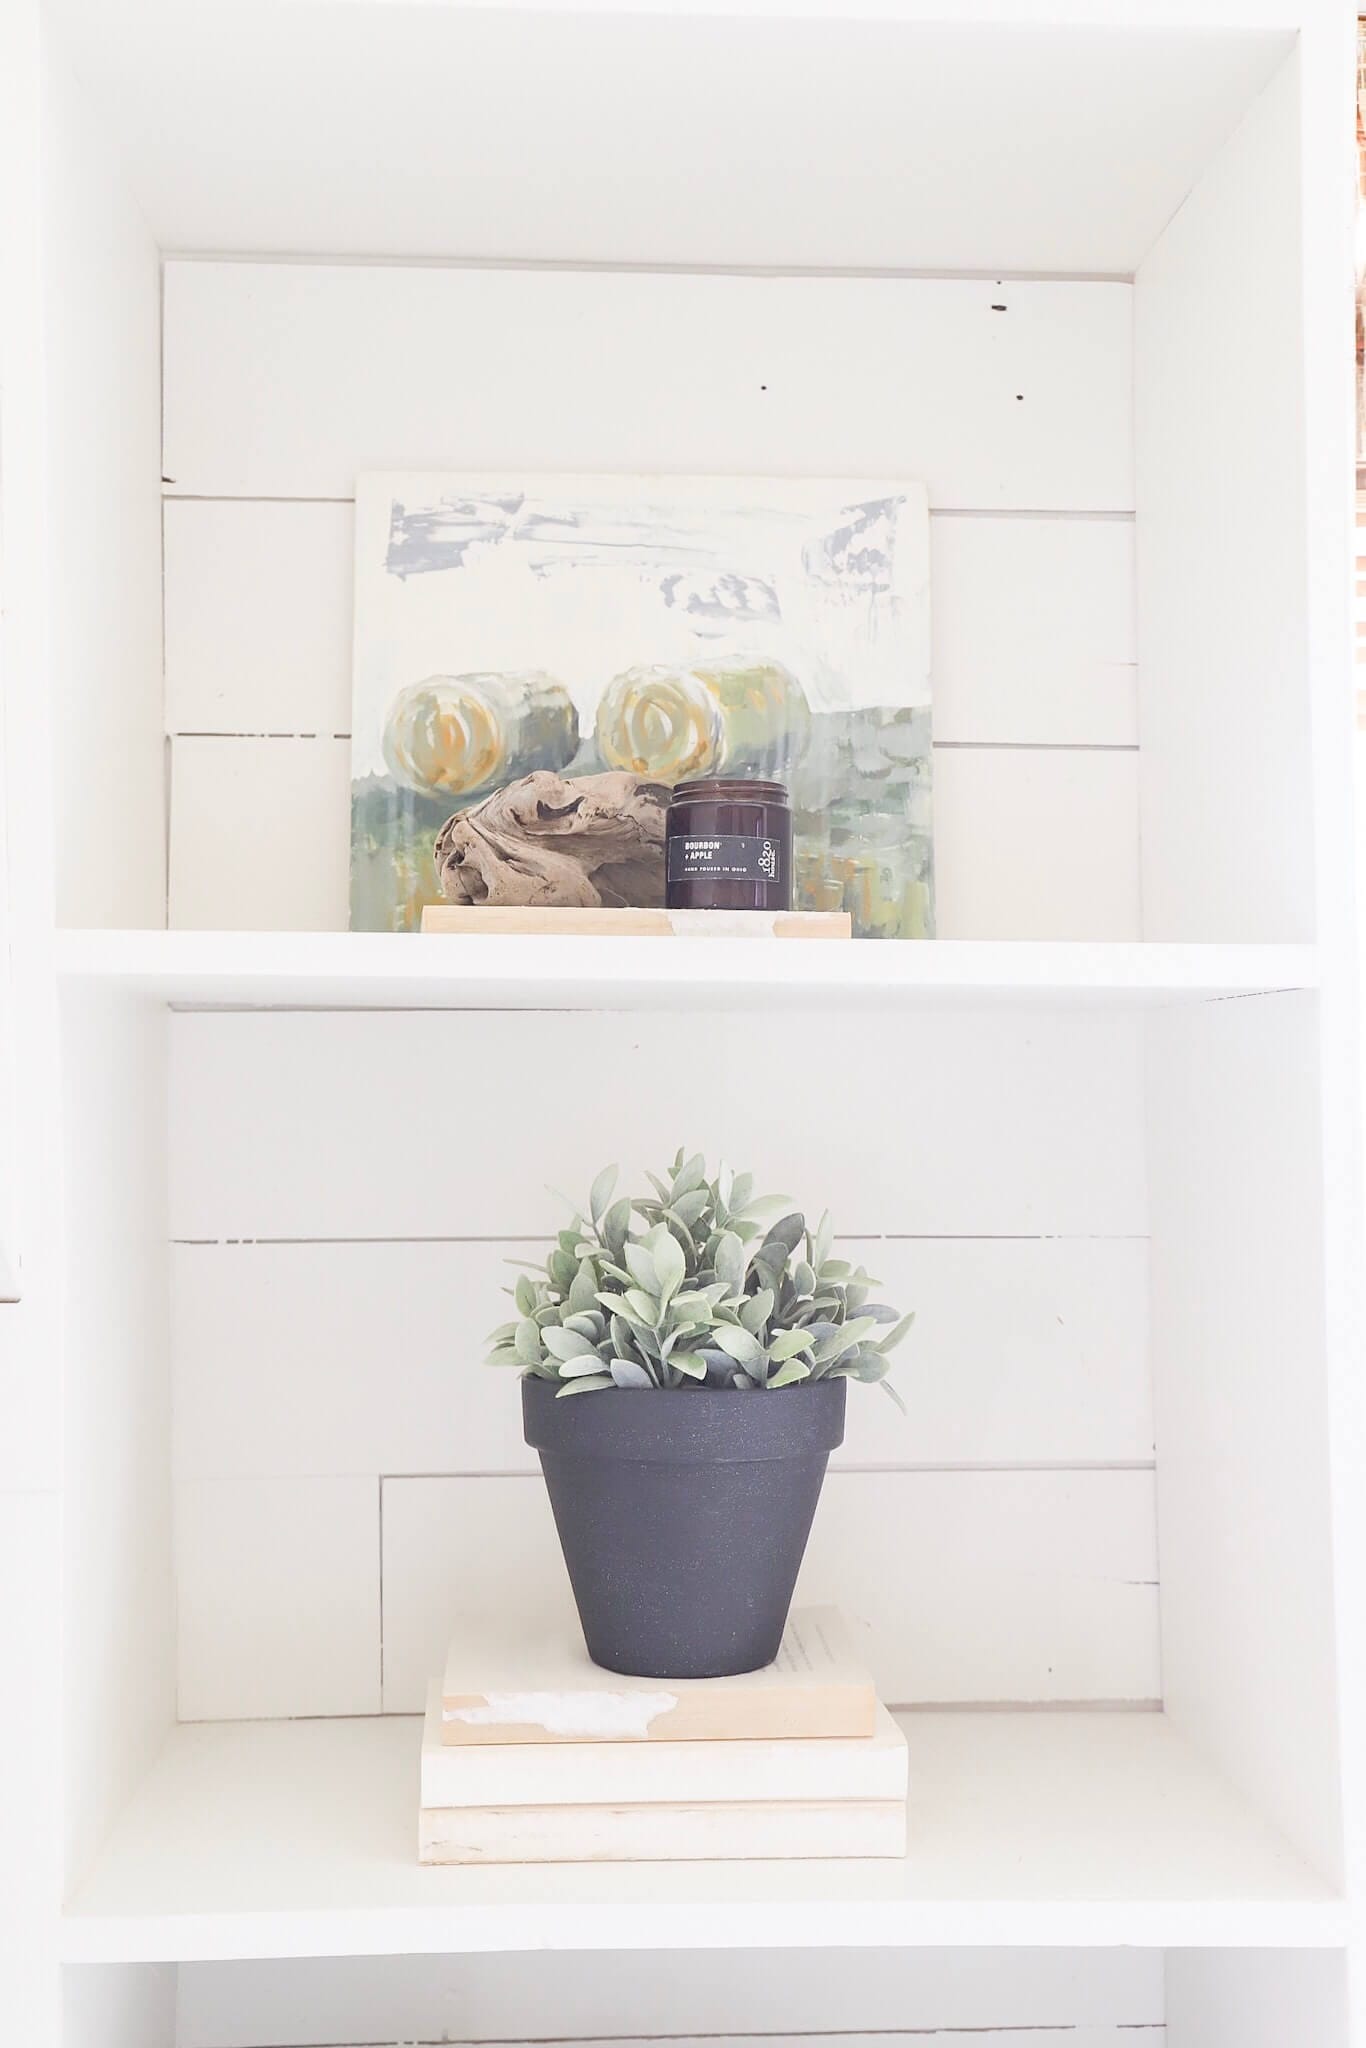 I used home made chalk paint on this terra cotta pot and totally transformed it! Have you made your own chalk paint before?